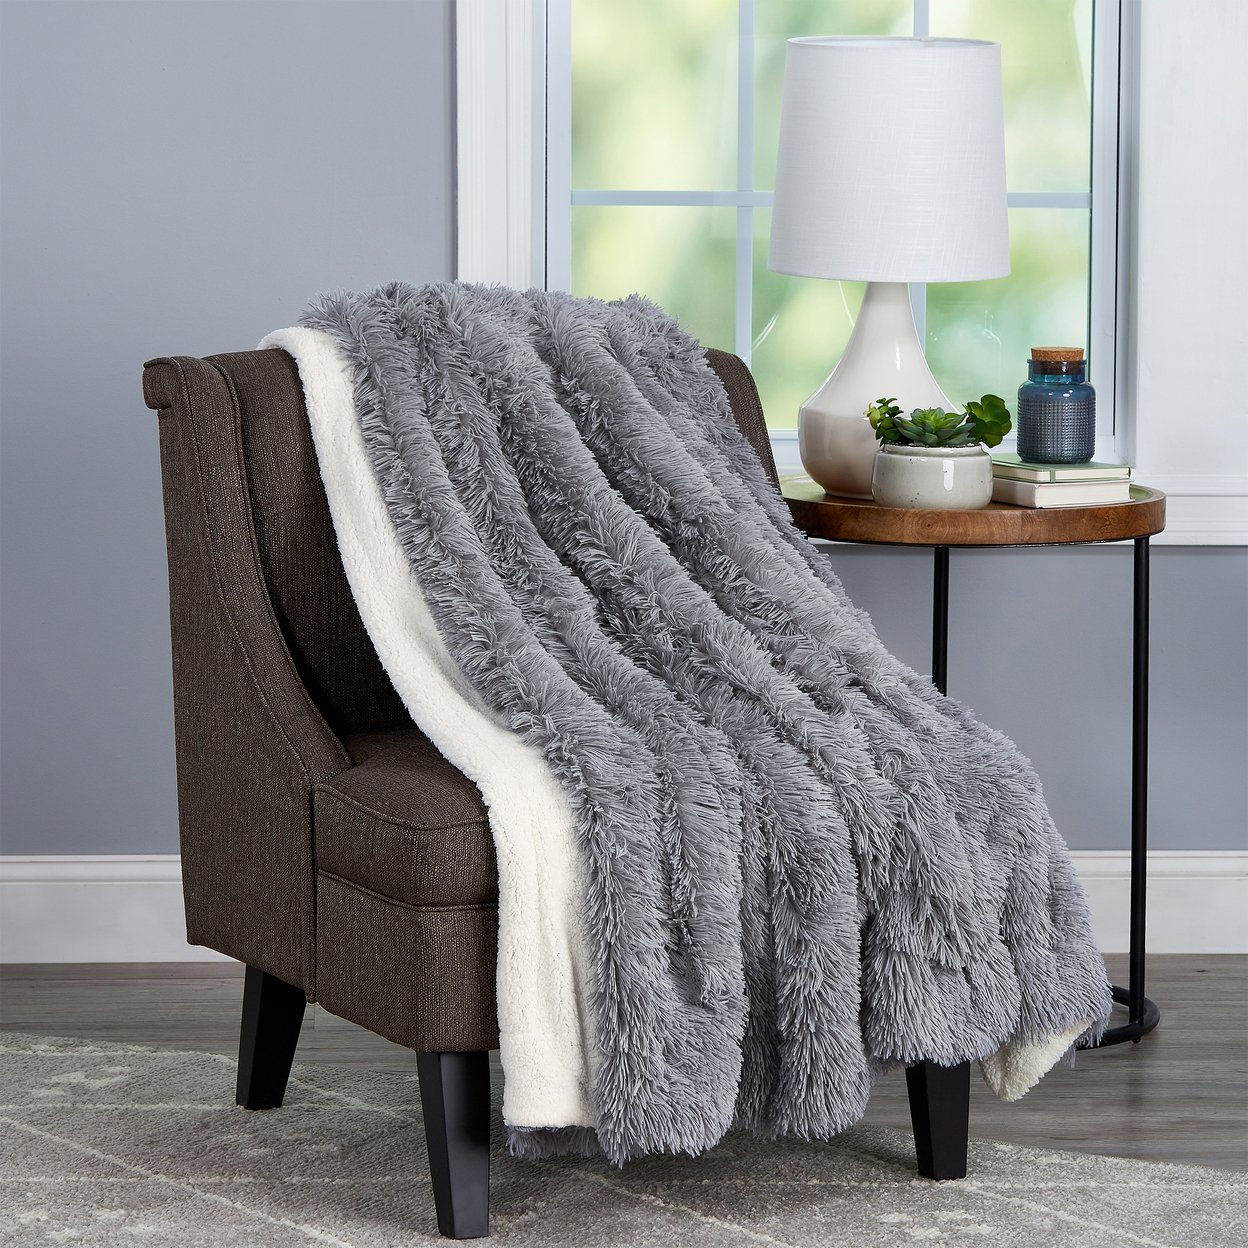 Faux Fur XL Throw Blanket Gray Soft Faux Rabbit Fur Blanket With Sherpa Back